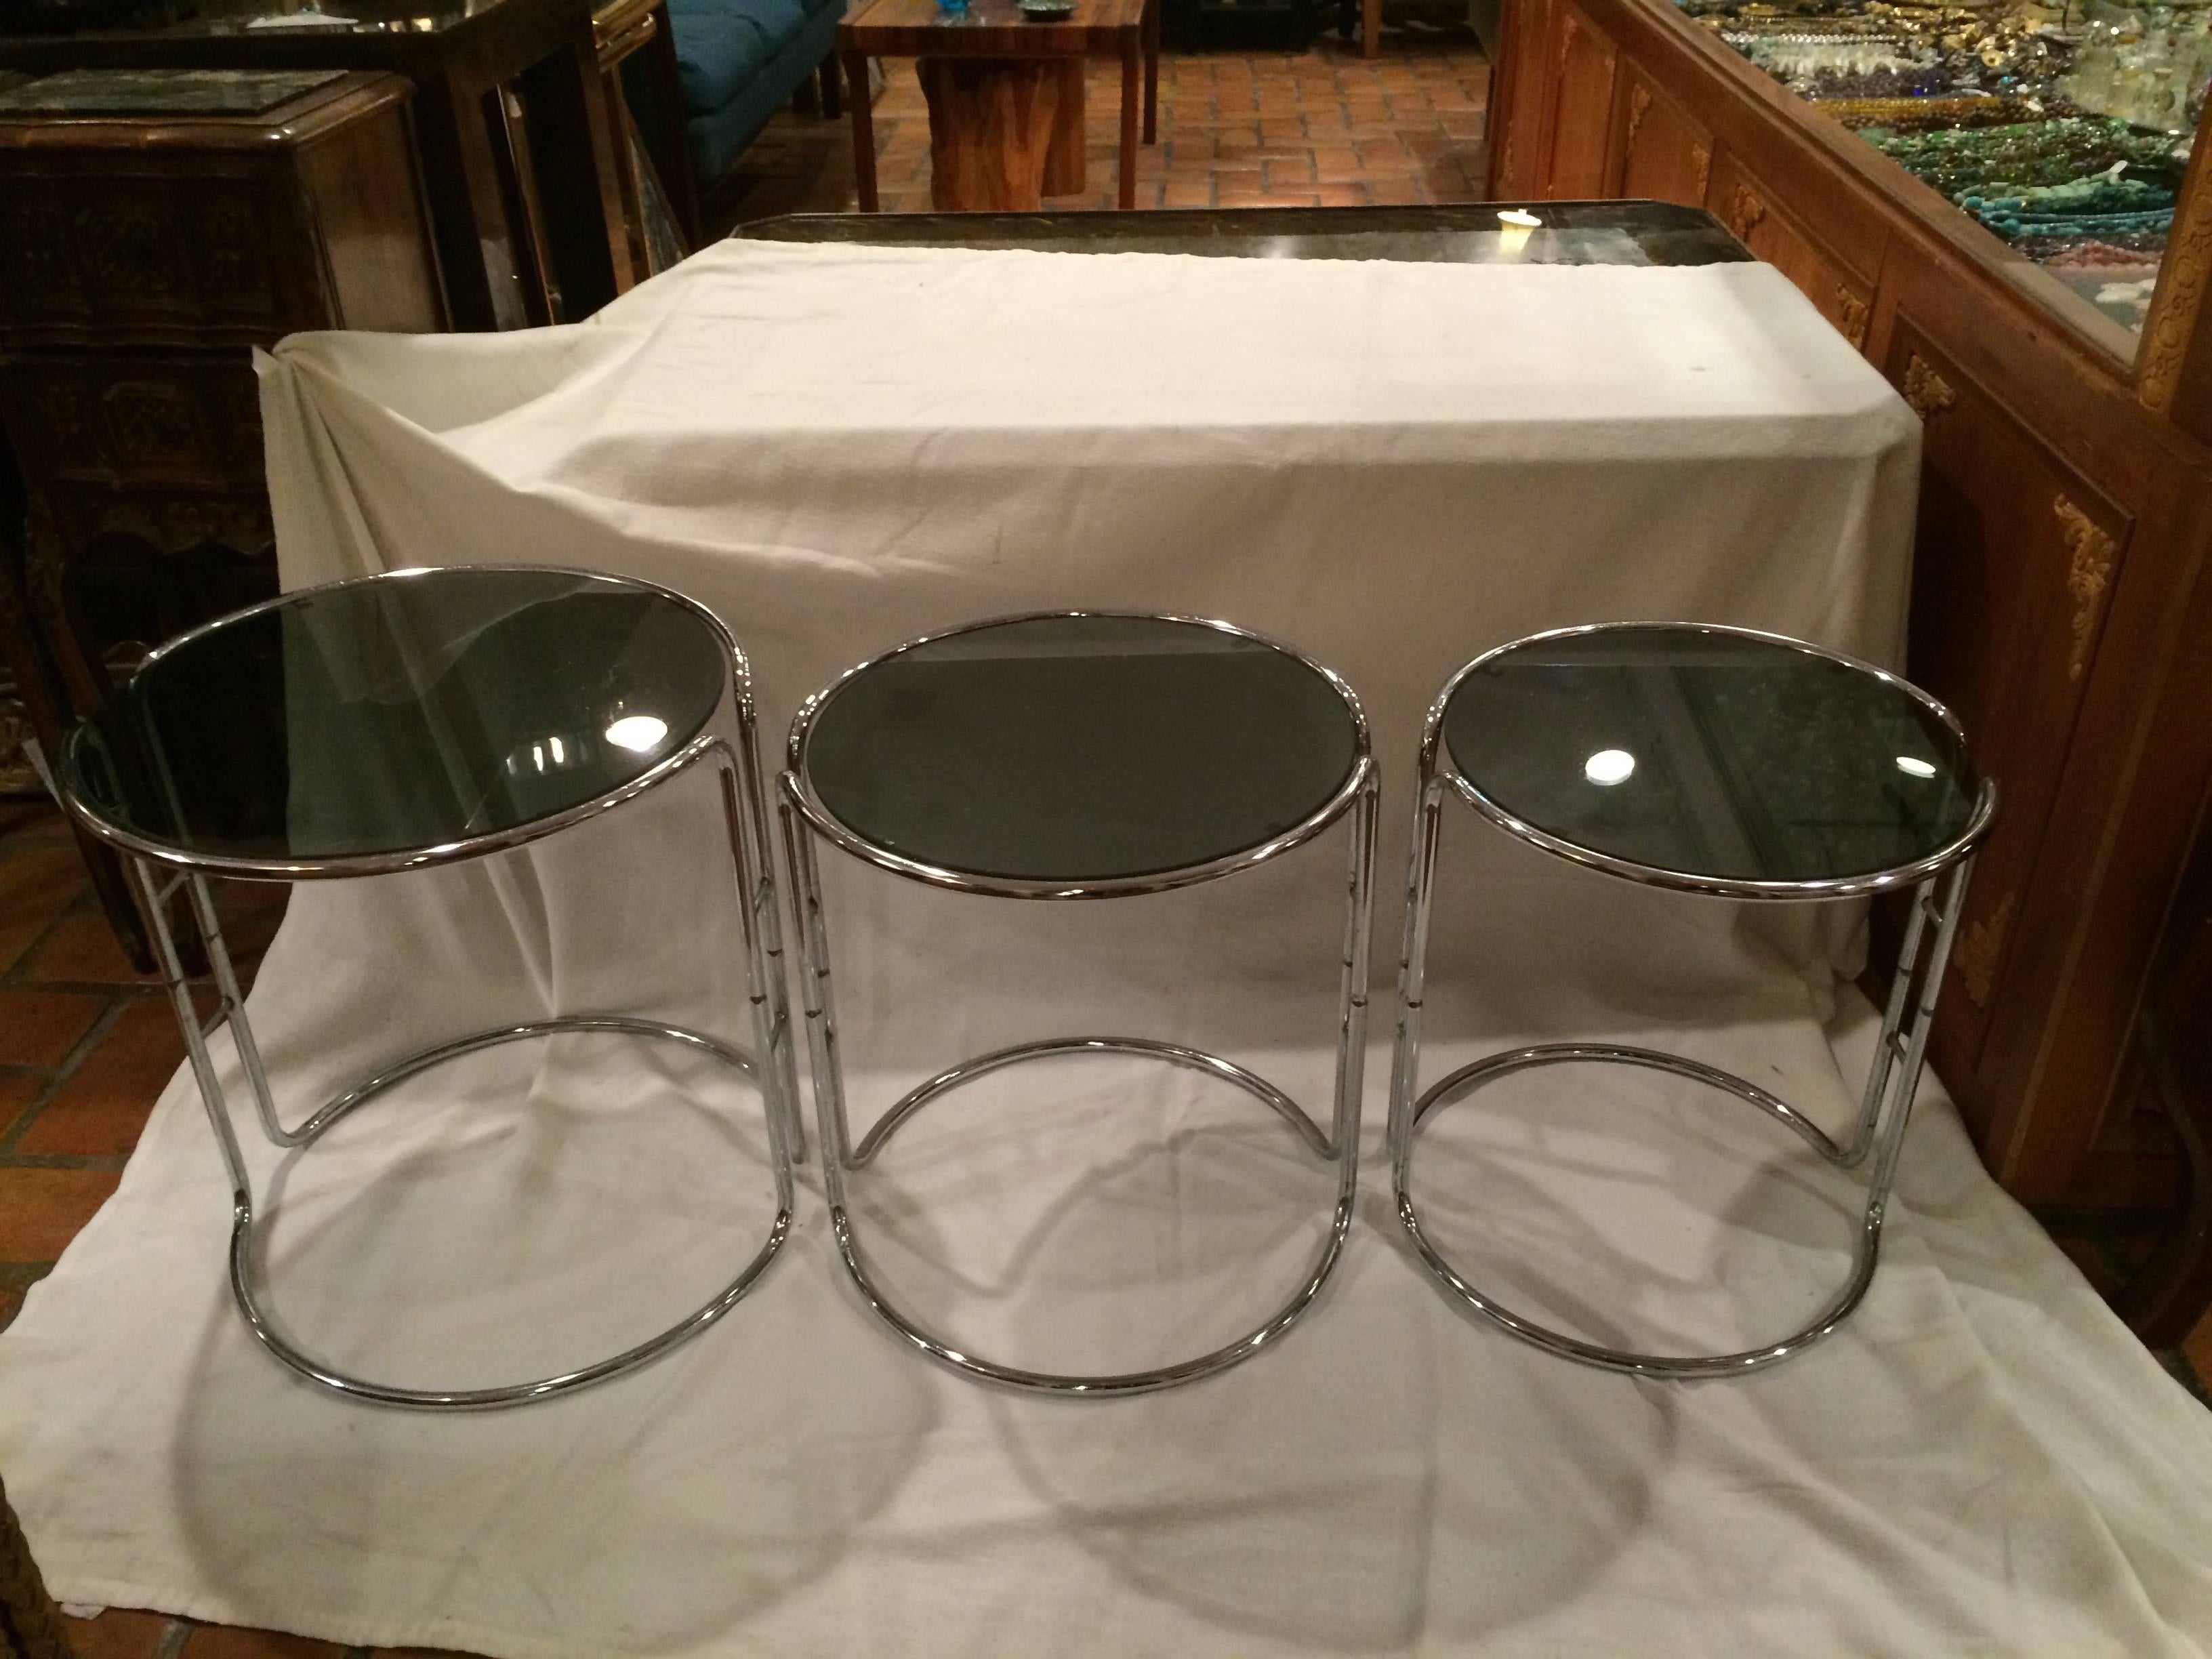 Set of three Milo Baughman chrome and smoked glass stacking tables. Fabulous lines make up this head turning trio. One table fits over the other so they are stack-able, more than a nesting set. Great for small, limited spaces.